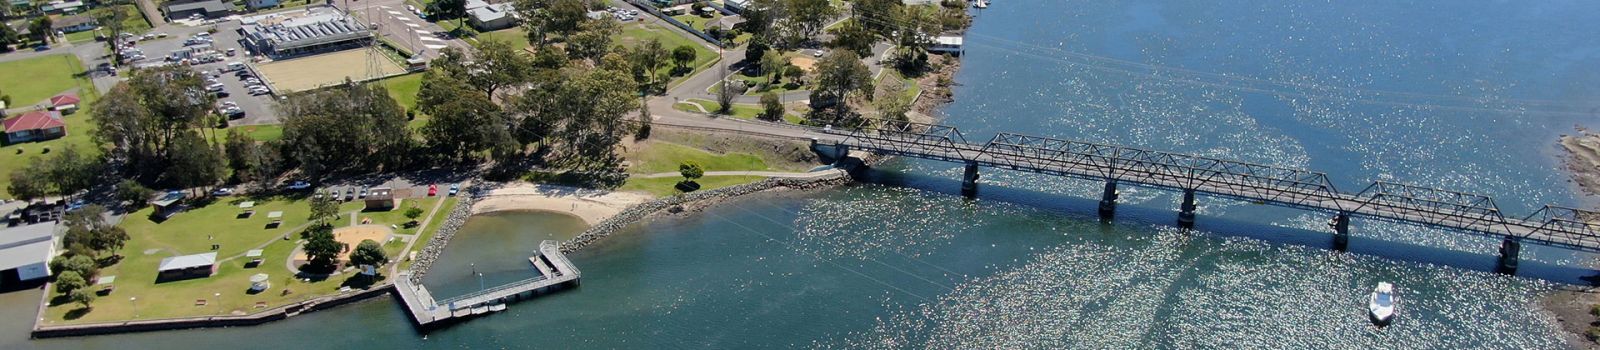 Aerial photograph looking over hte KAruah bridge and boat ramp banner image